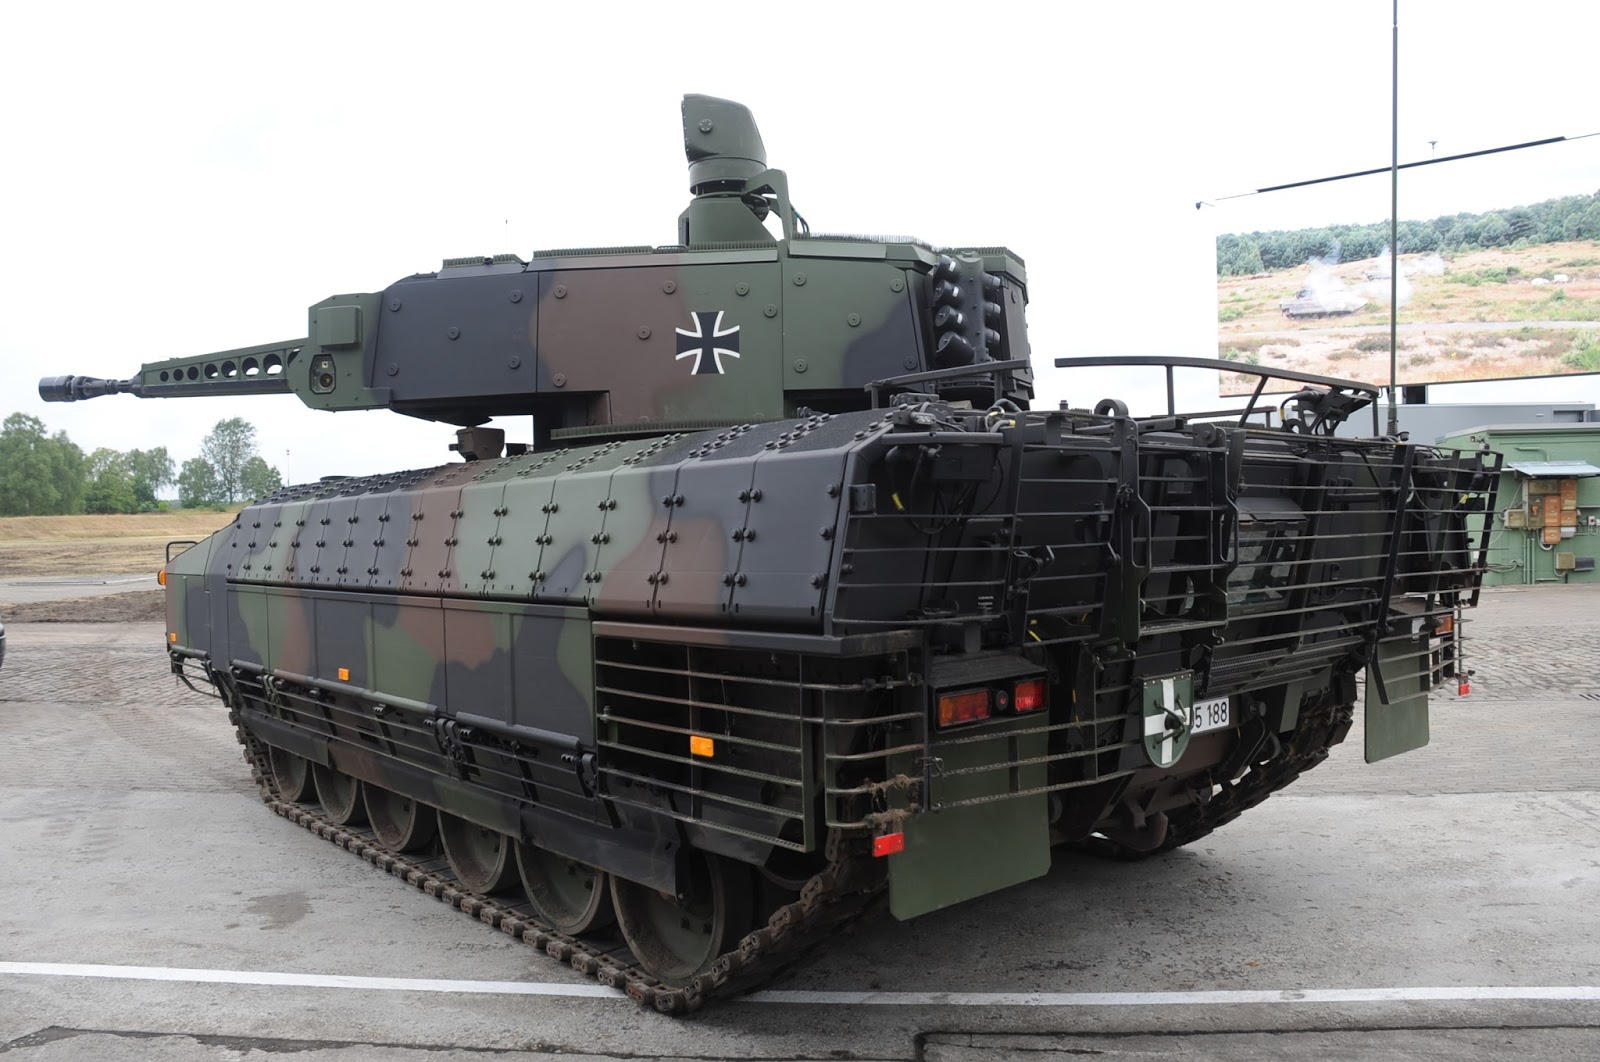 MILITARY PUMA IFV Meeting the Exacting Requirements